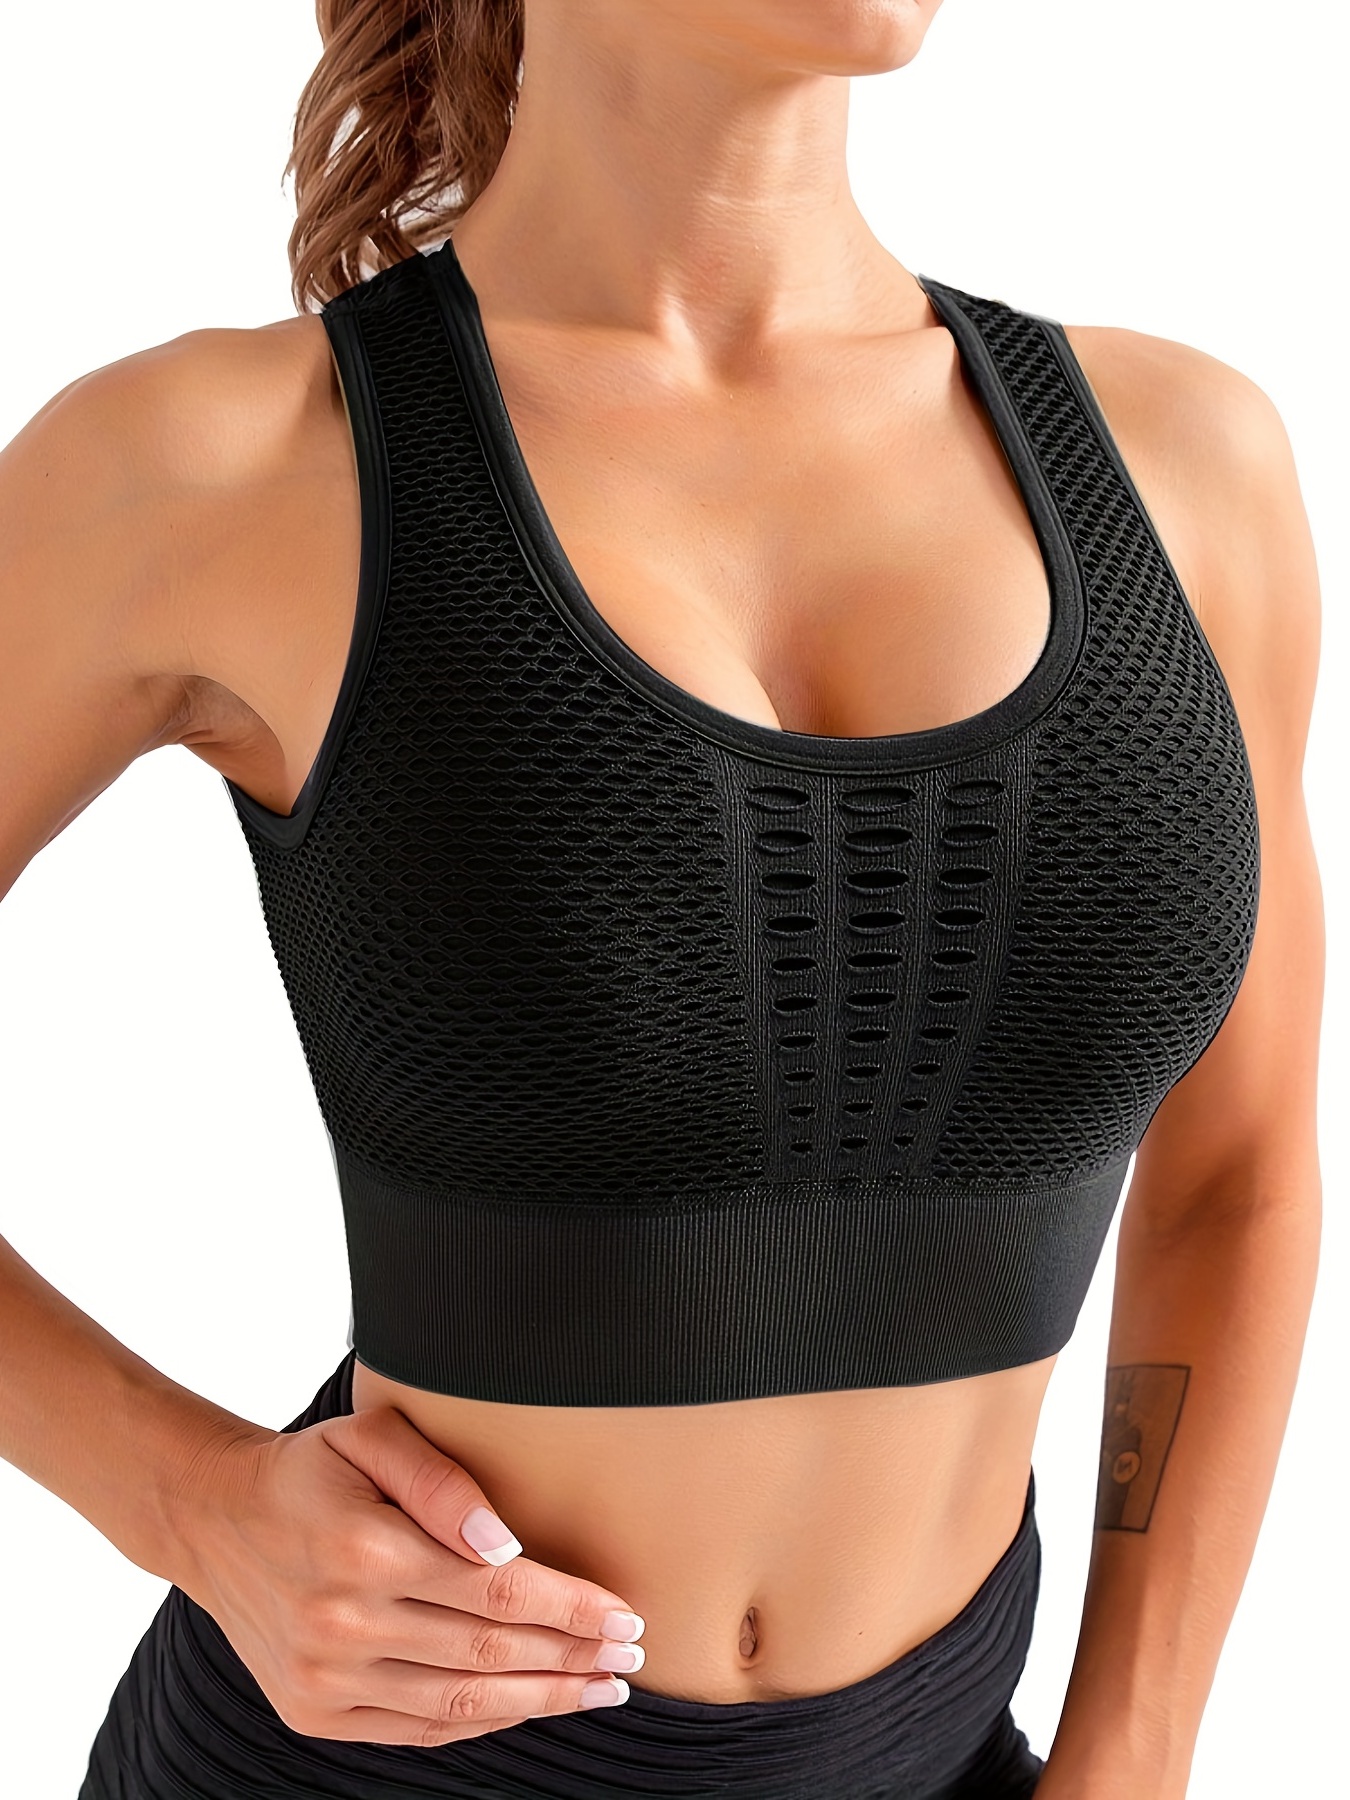 Women Mesh Sports Bra Top Push Up Side Cross Hollow Out Padded